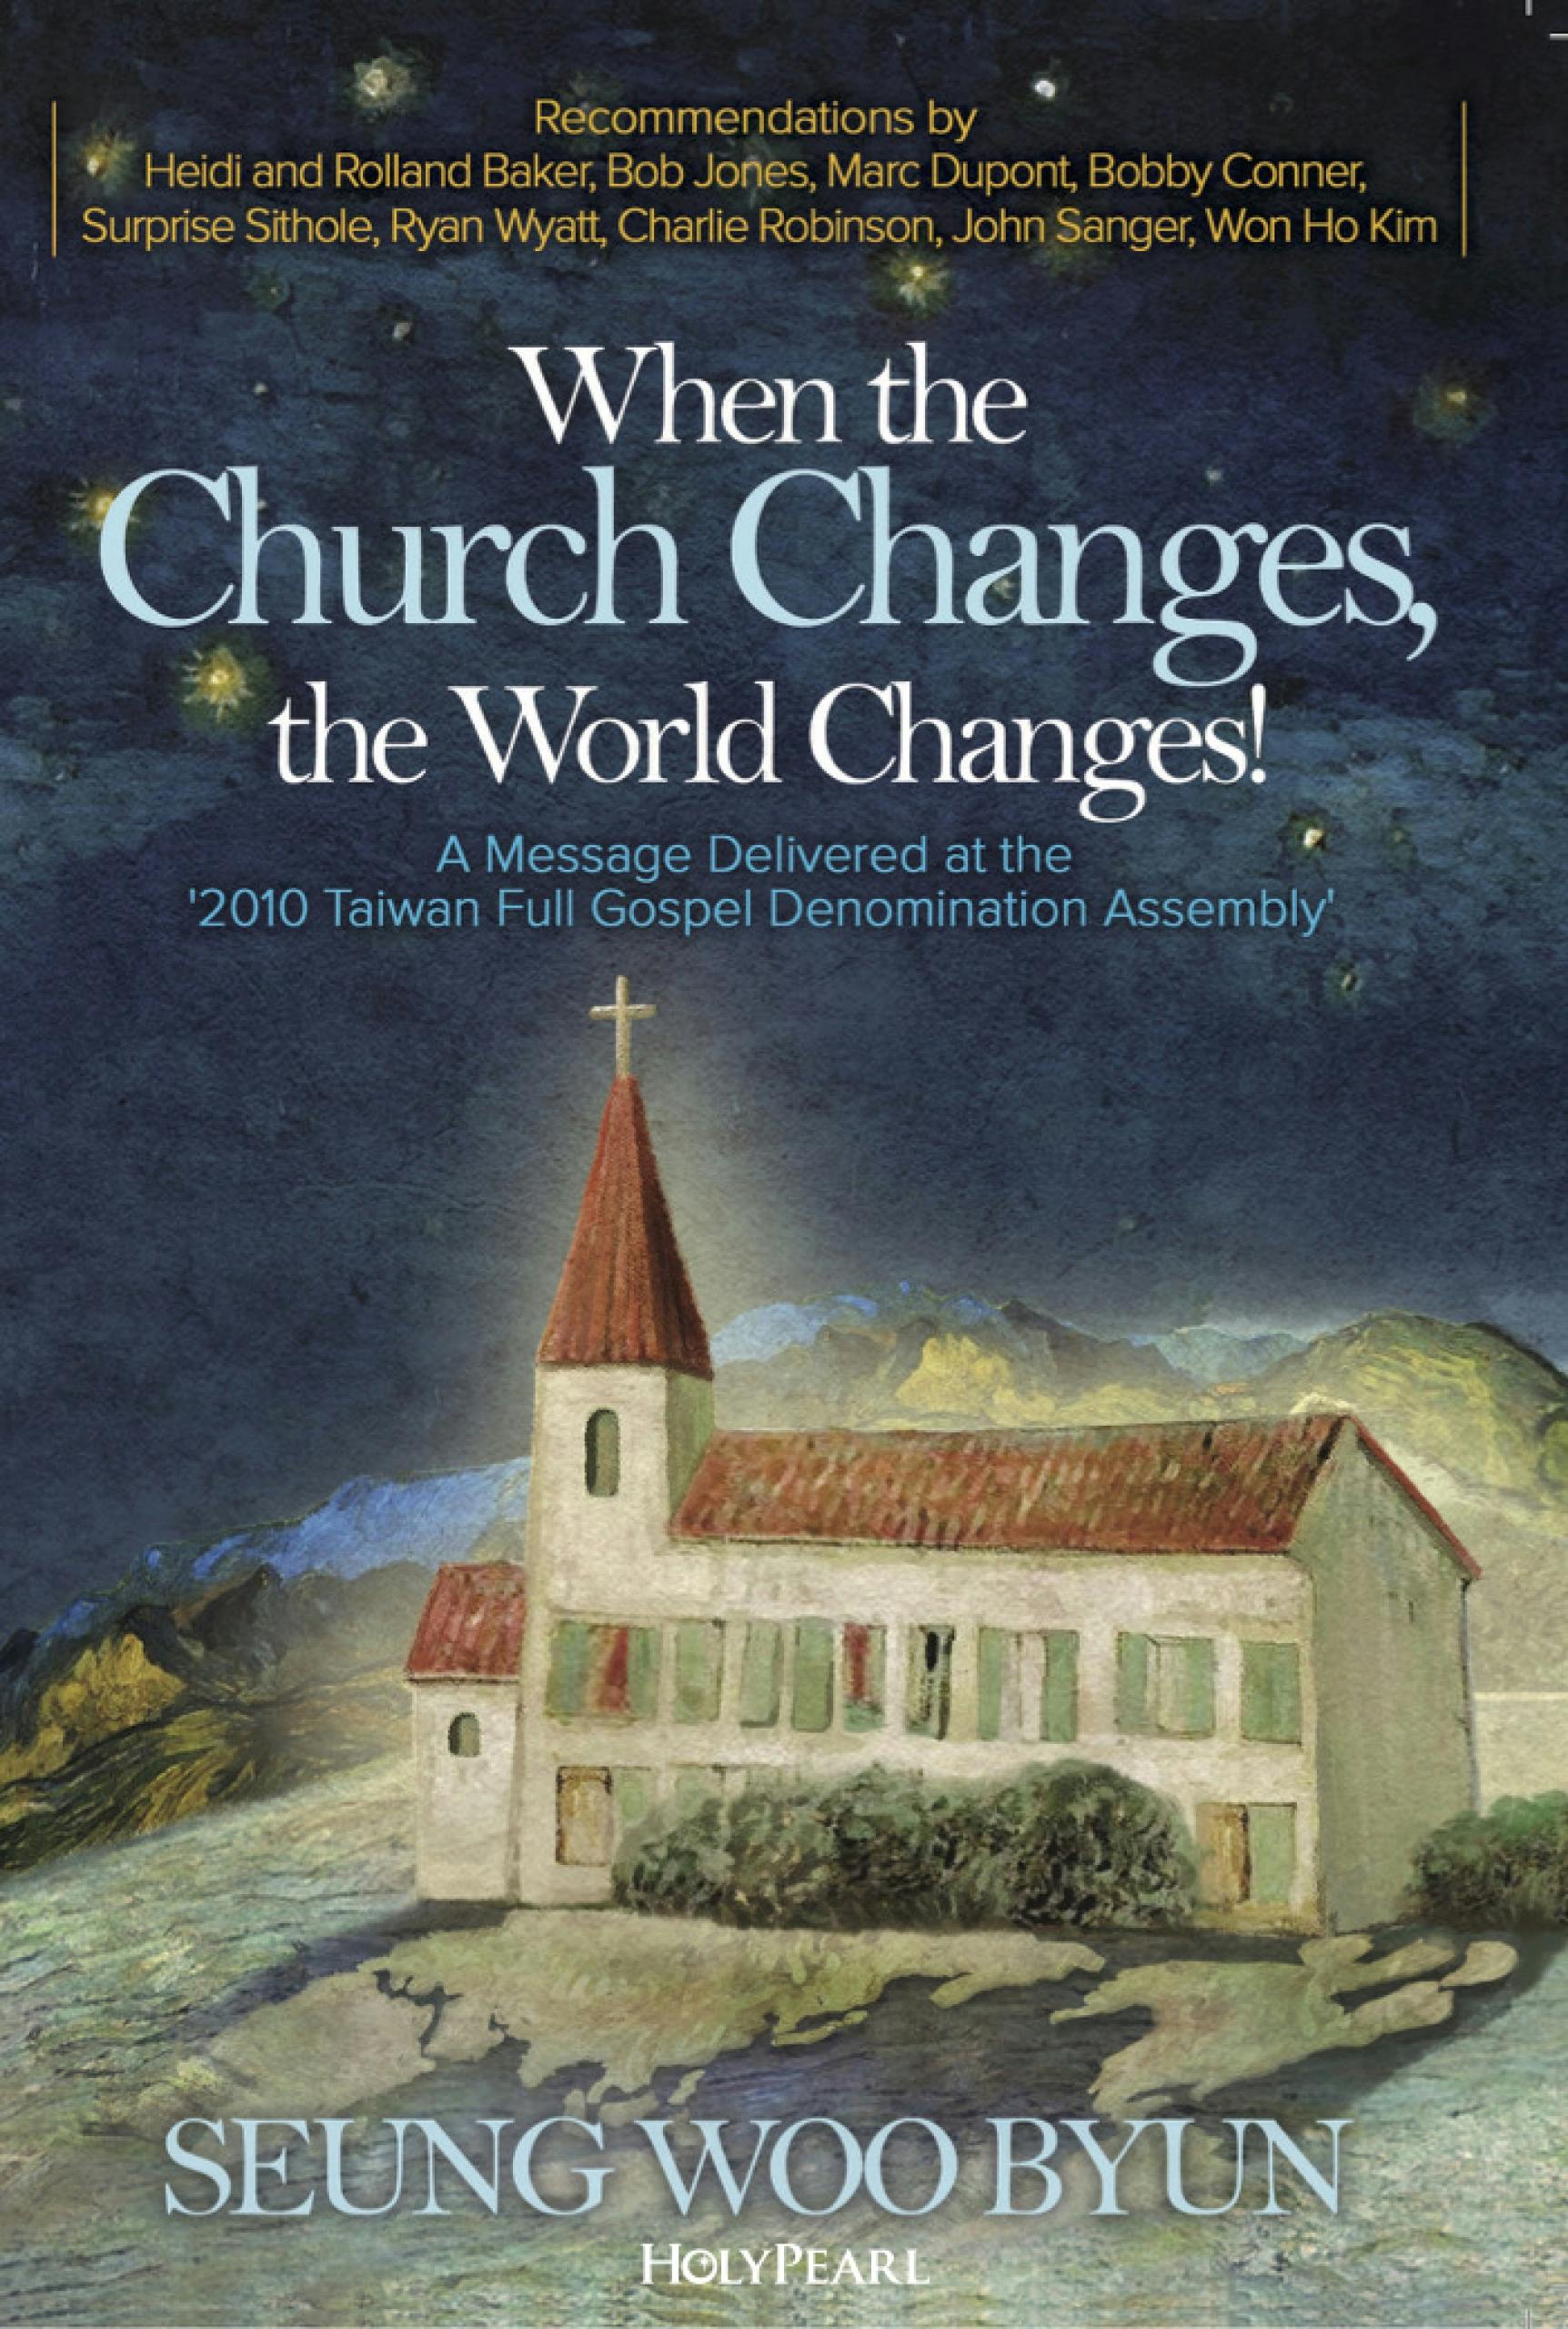 When the Church Changes, the World Changes! - undefined